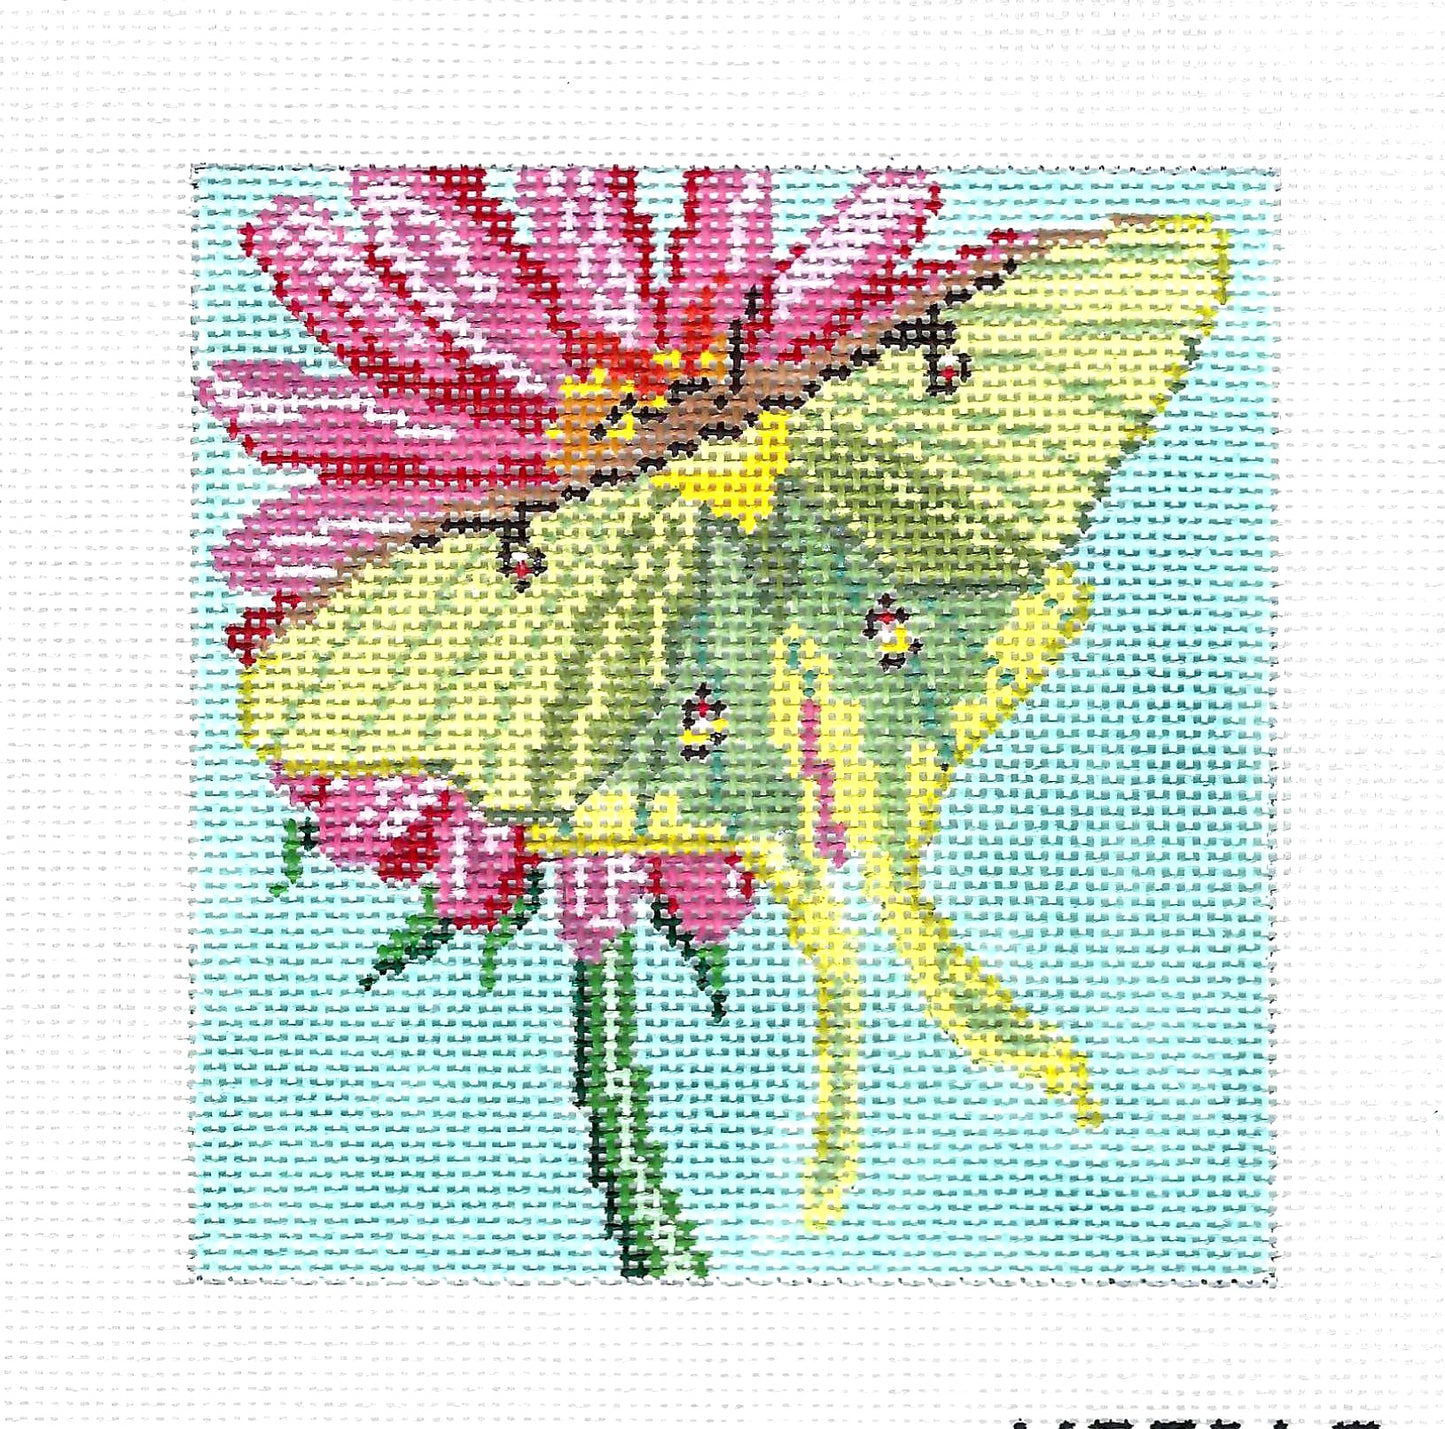 Luna Moth on Blossom 4.0" Sq. Handpainted Needlepoint Canvas by Needle Crossings